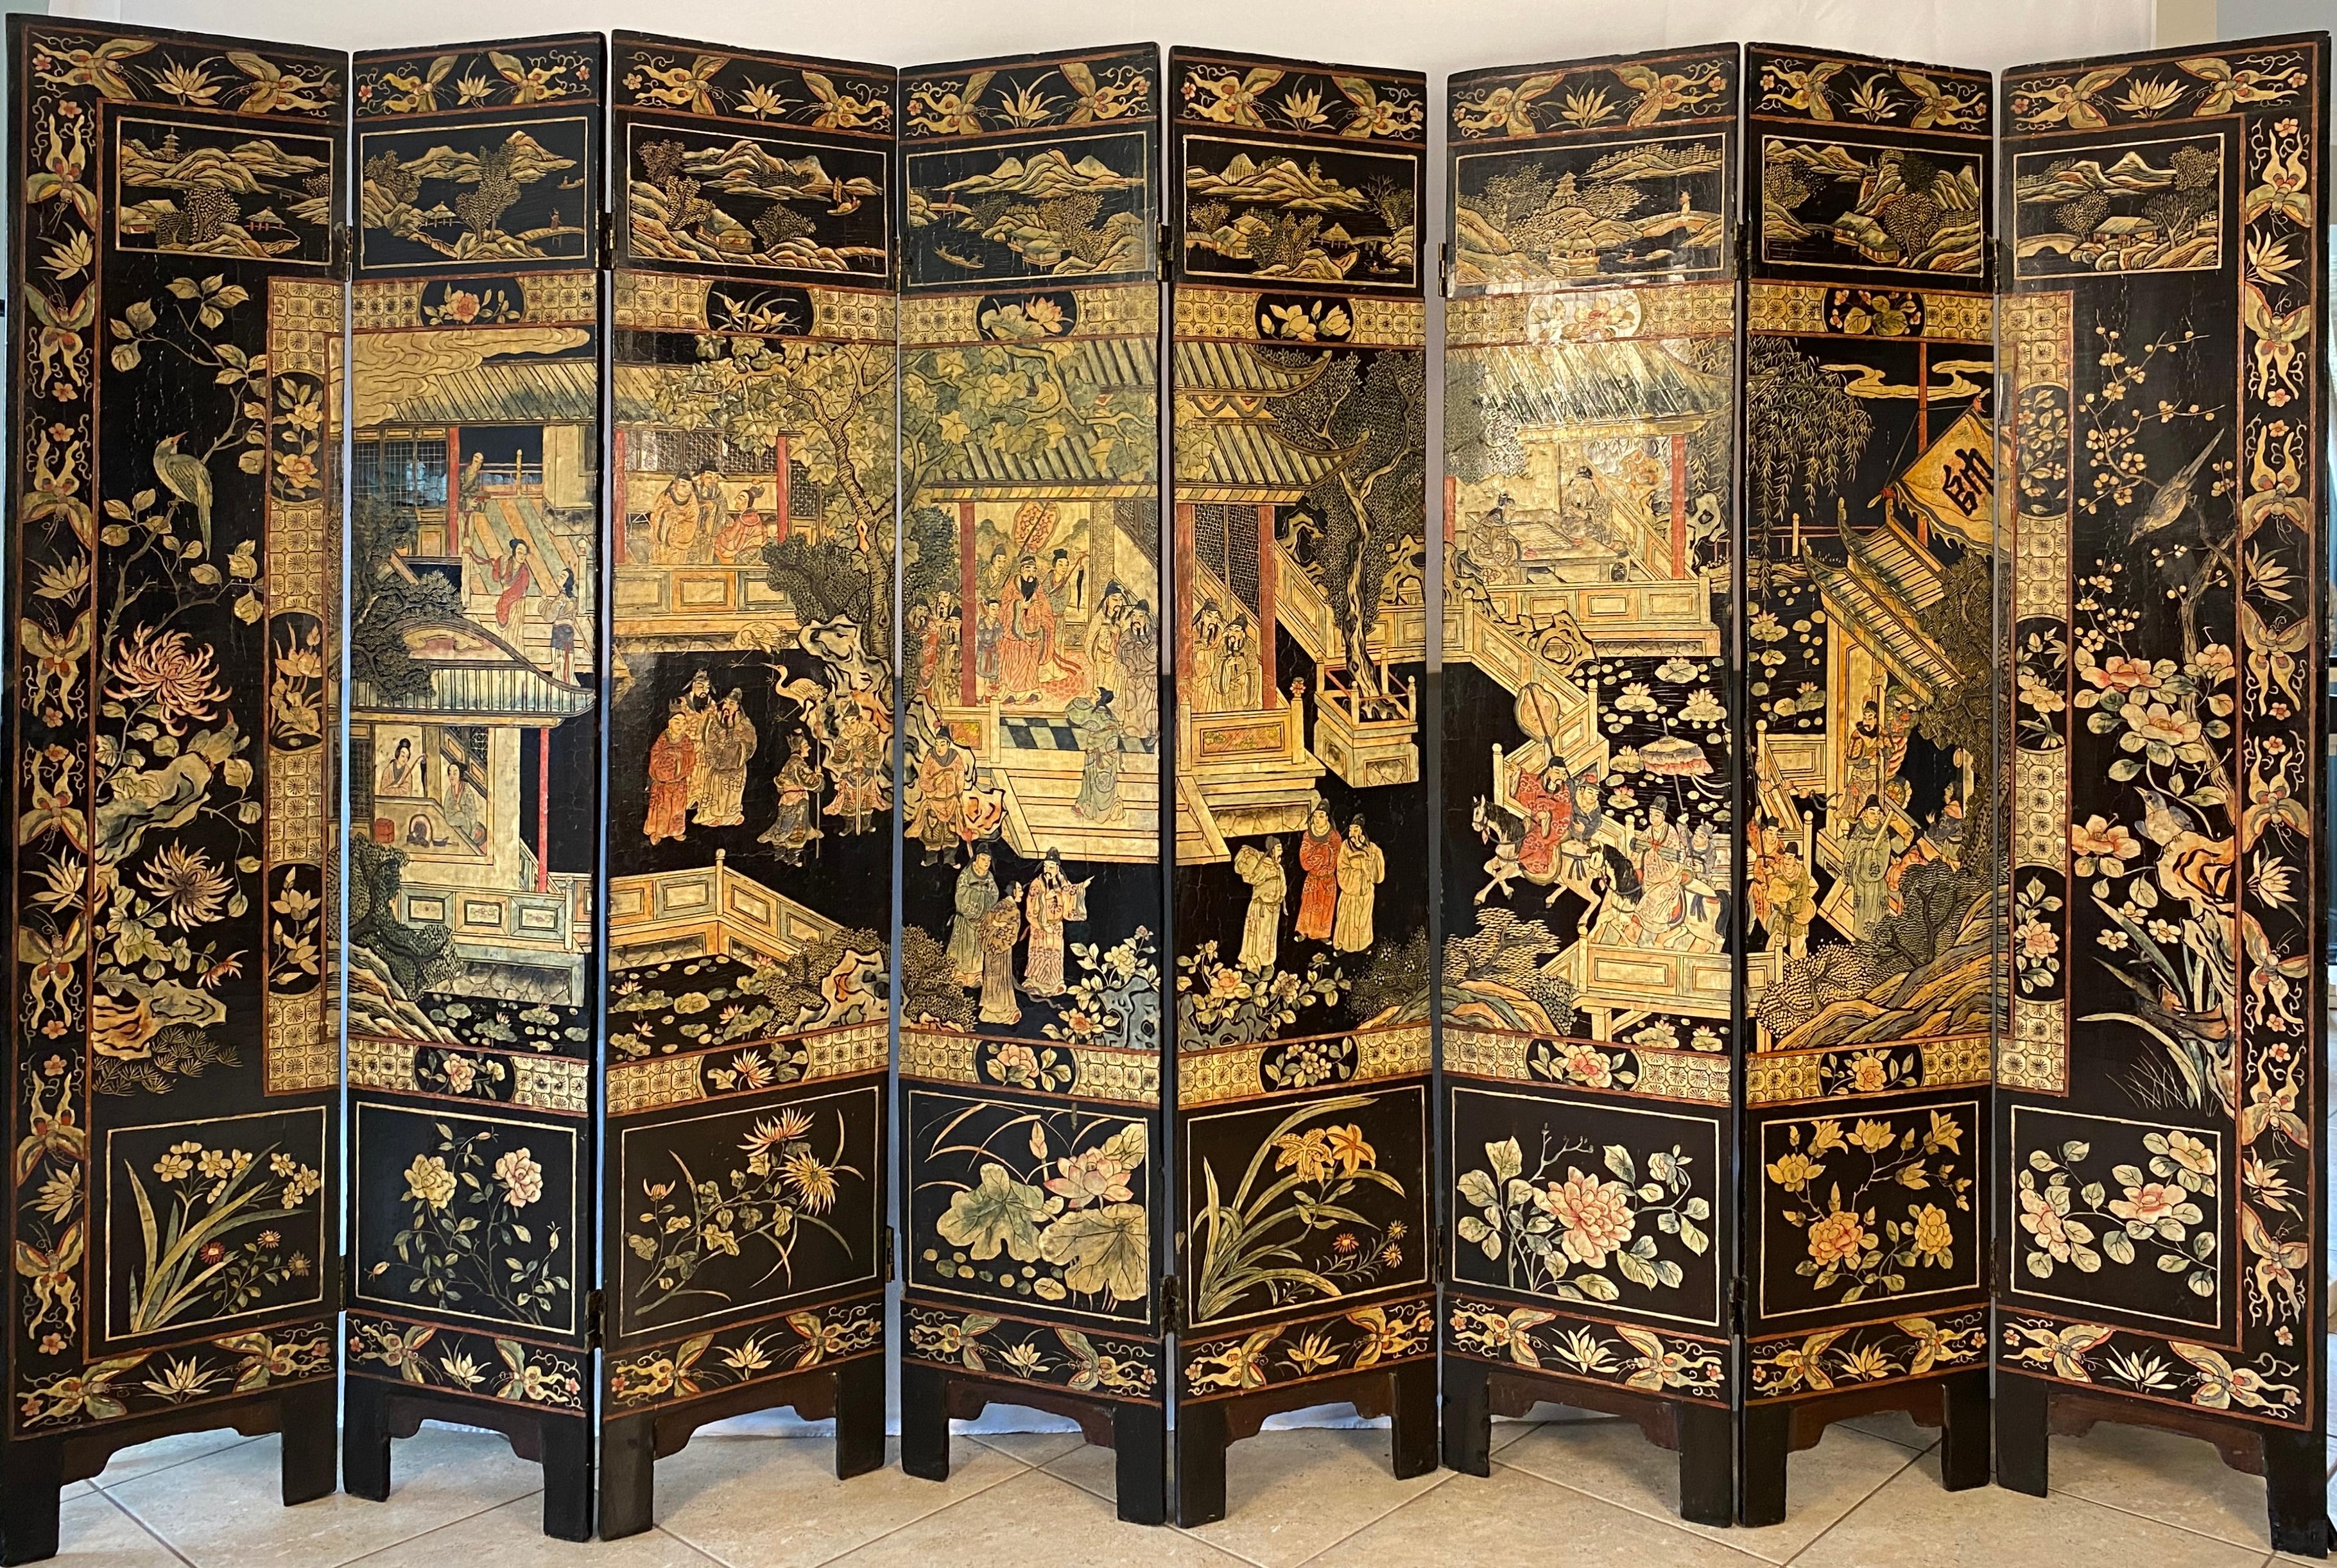 Step back in time with this captivating eight-panel Coromandel screen, a rare and exquisite example of early 19th-century Chinese craftsmanship.  Embellished on both sides, the panels unfold a captivating narrative of life within the Forbidden City.